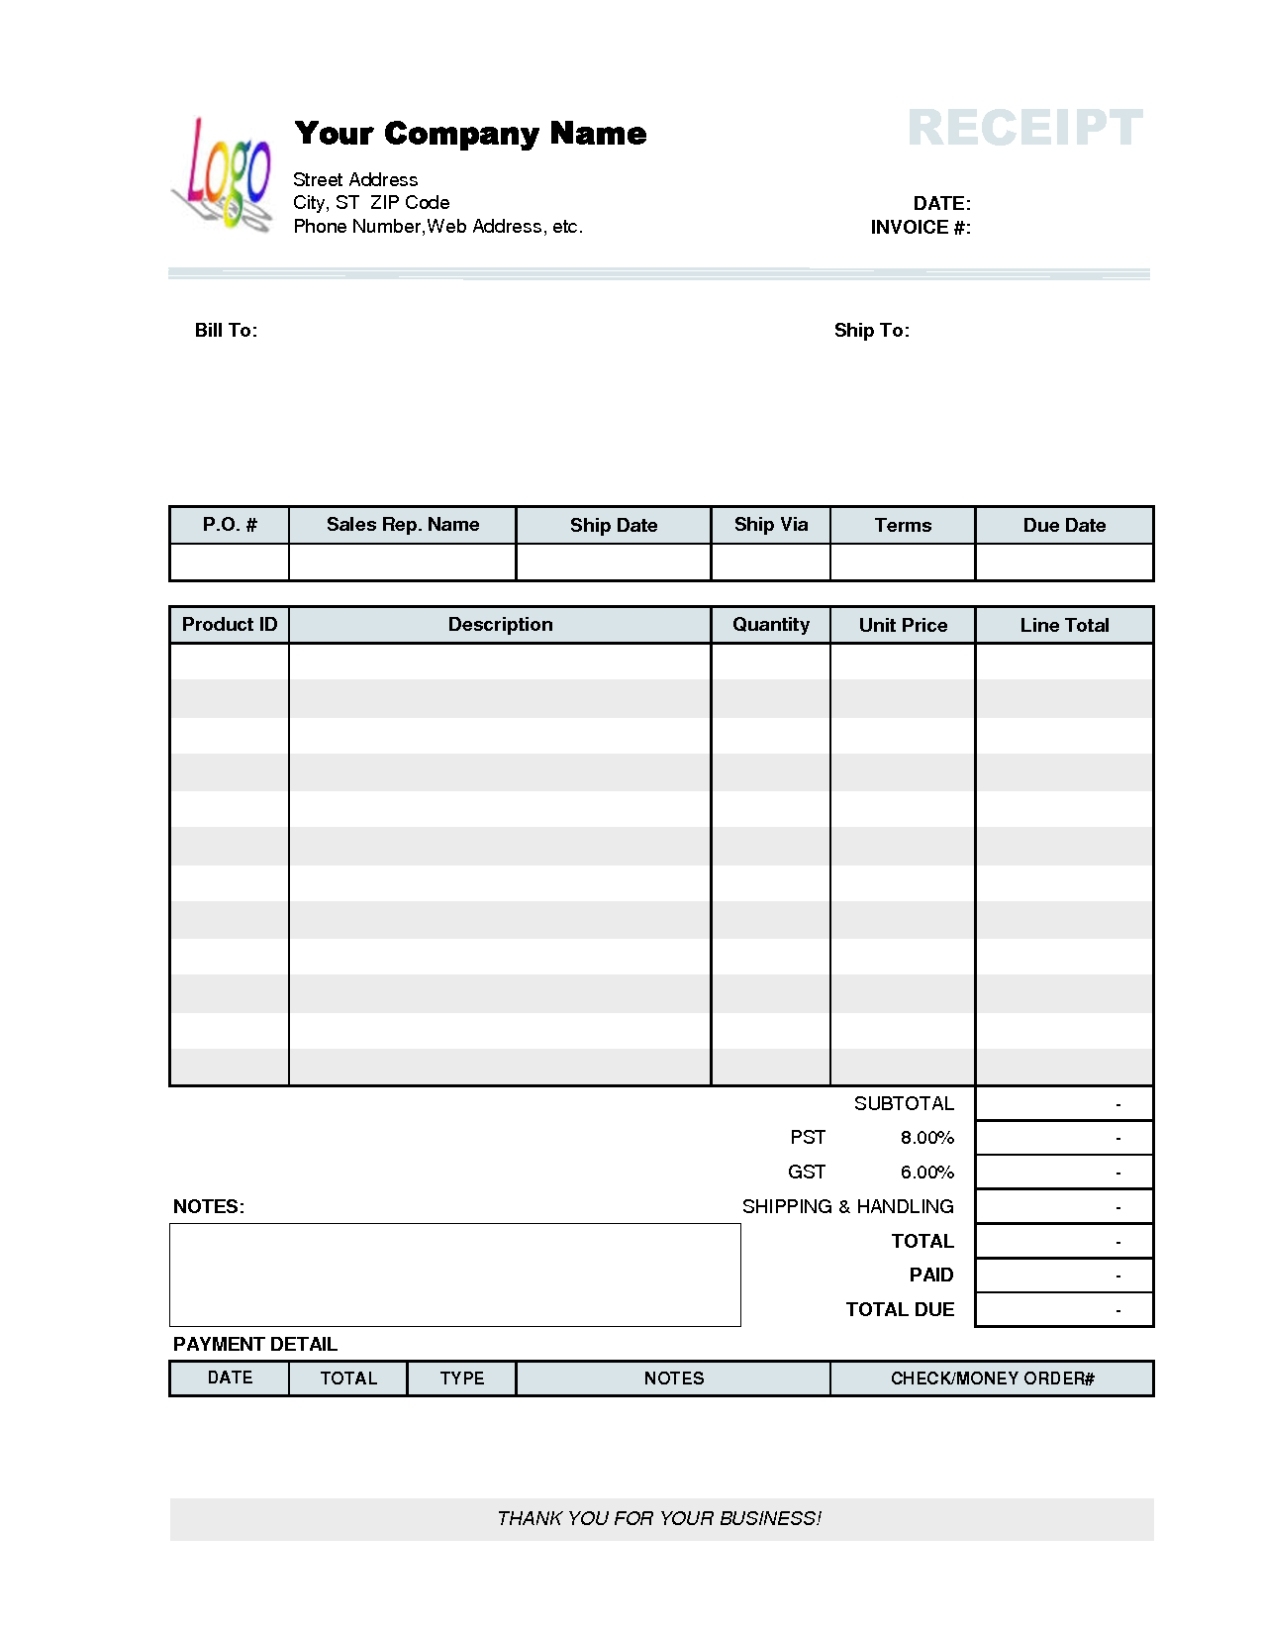 Download Microsoft Office 2003 Receipt Templates – Softwarenews Inside Microsoft Invoices Templates Free